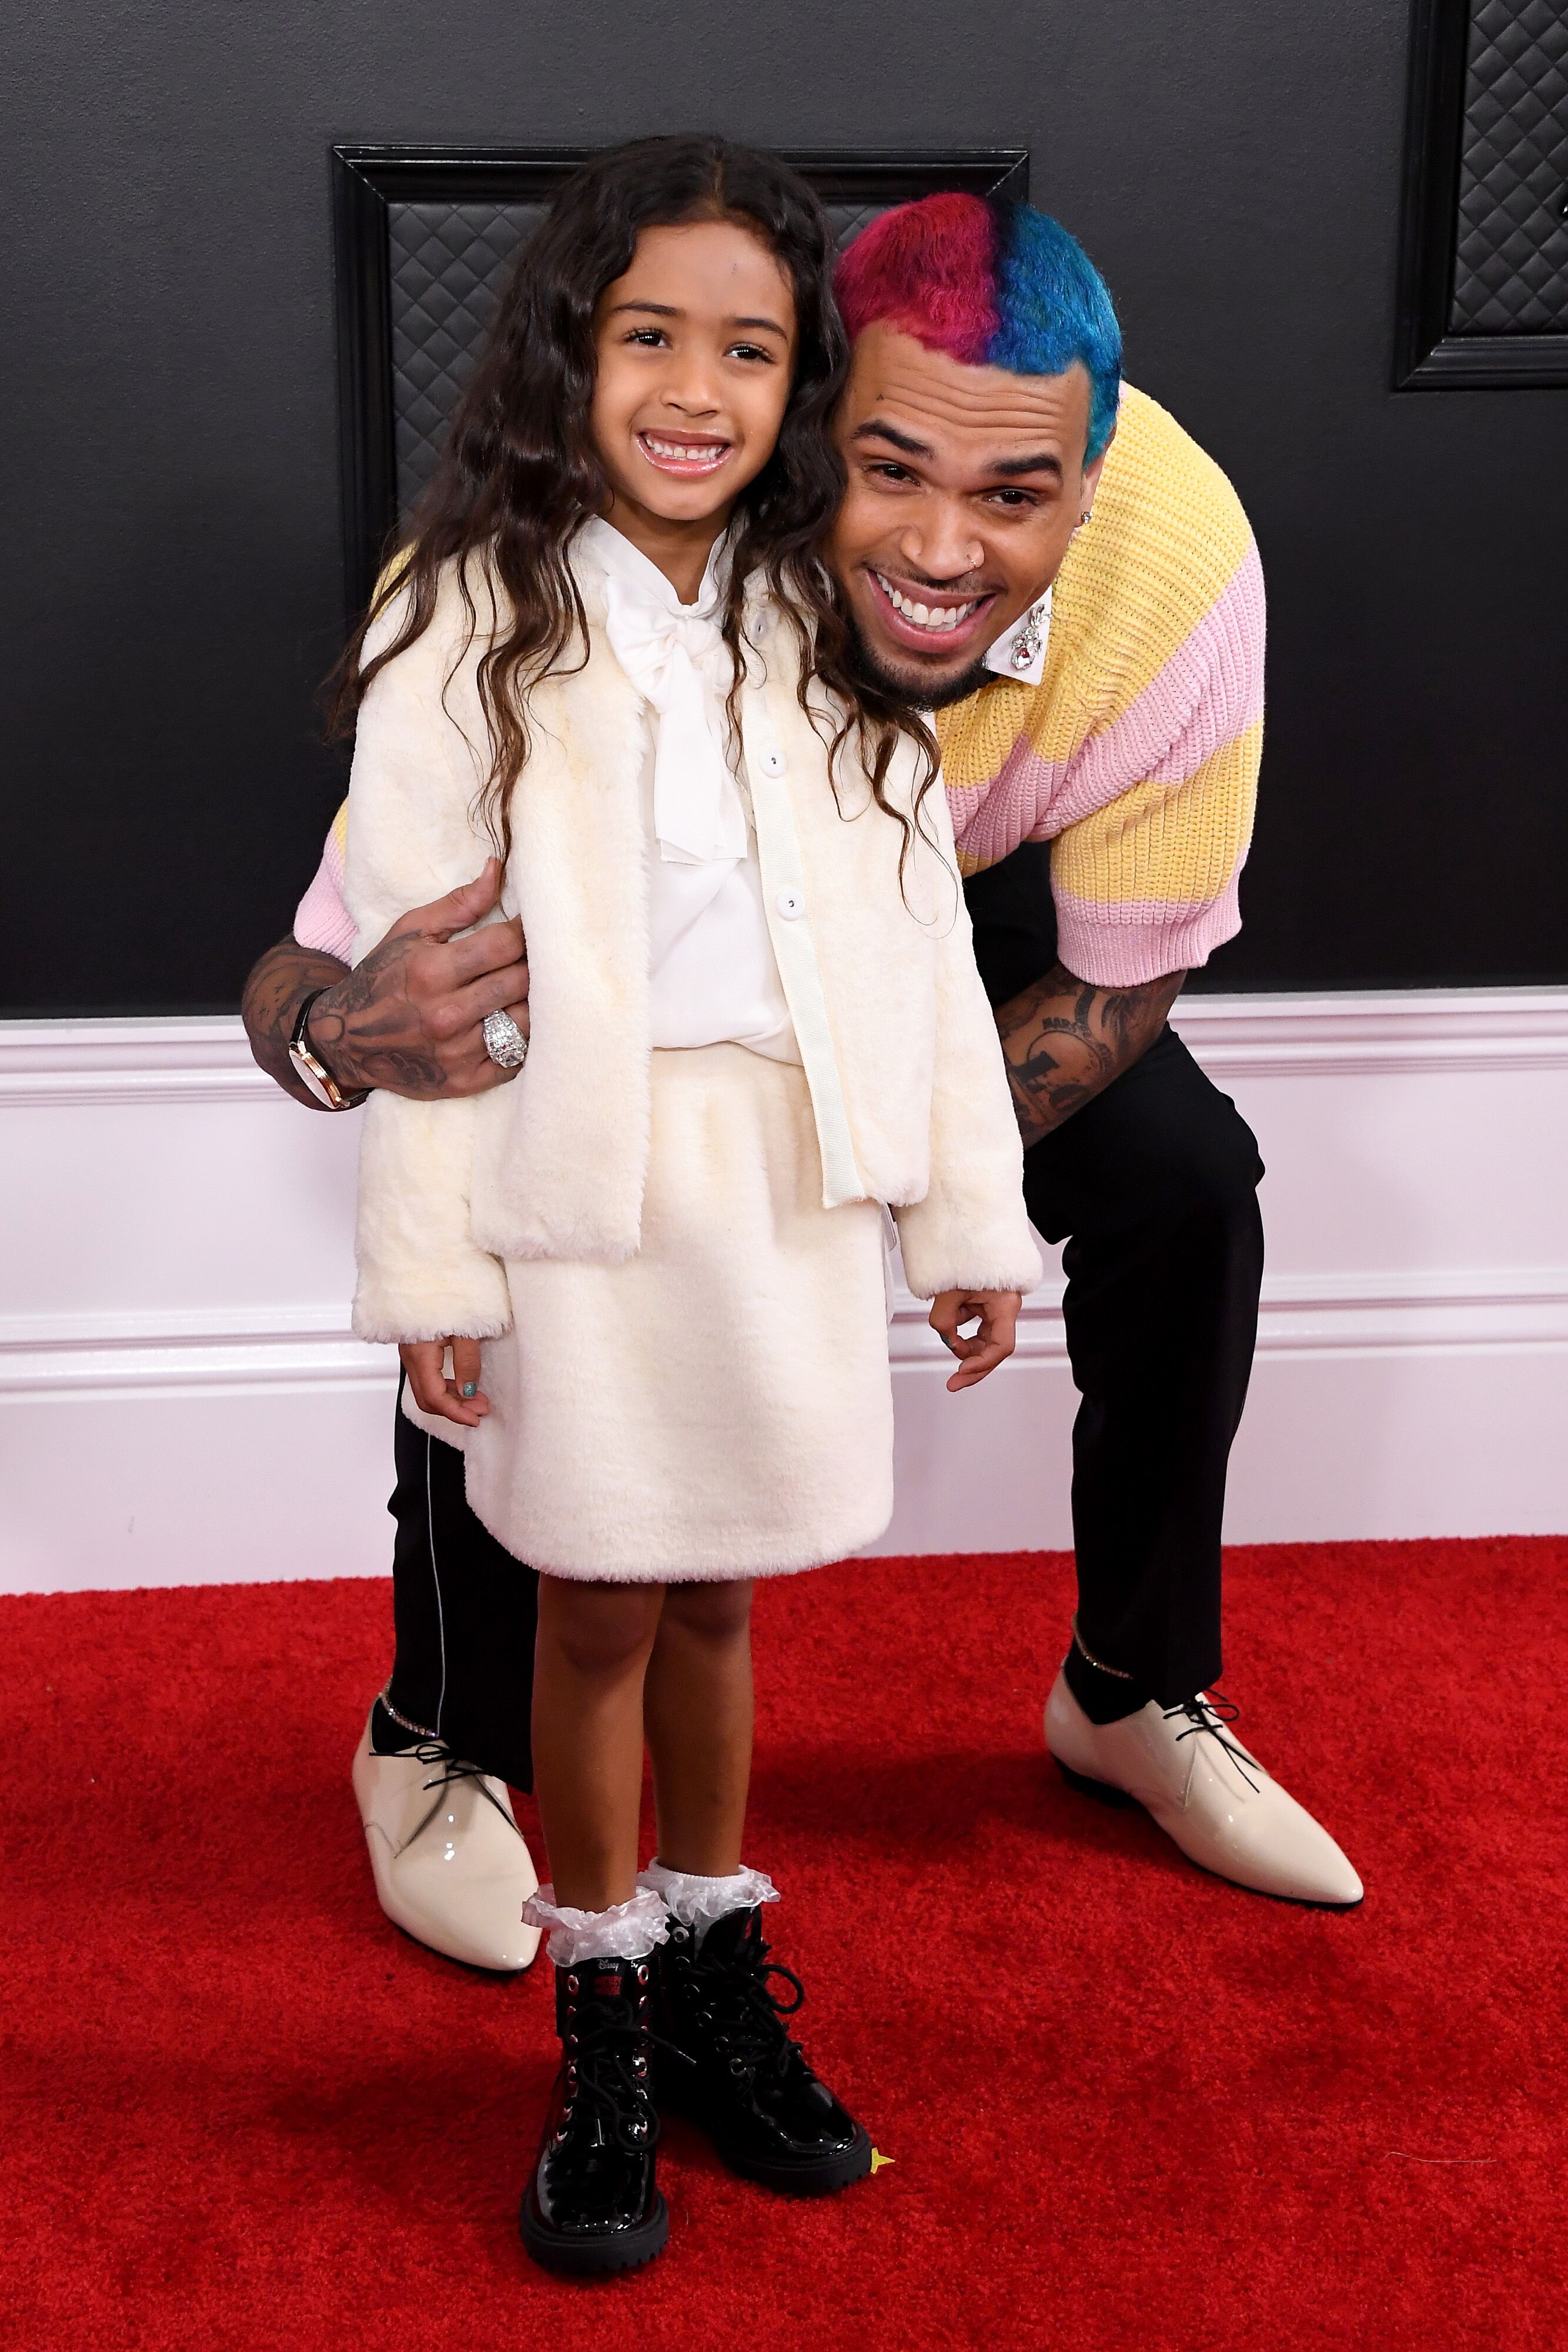 Royalty Brown and Chris Brown attend the 62nd Annual GRAMMY Awards at Staples Center on January 26, 2020 | Photo: Getty Images